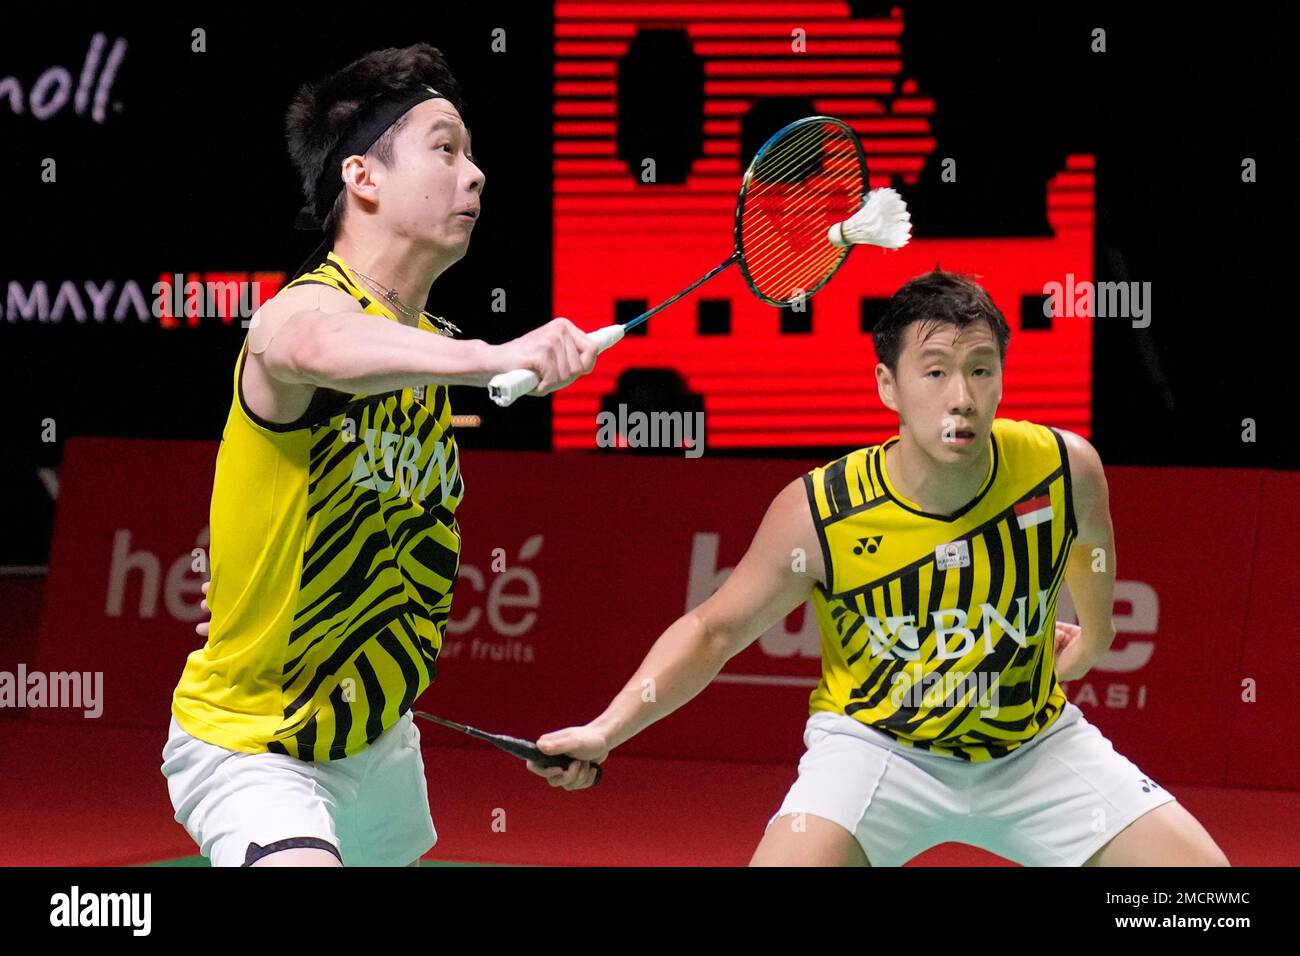 Indonesias Kevin Sanjaya Sukamuljo, left, and Marcus Gideon compete against Taiwans Lee Yang and Wang Chi Lin compete during their mens doubles Group A badminton match at the BWF World Tour Finals